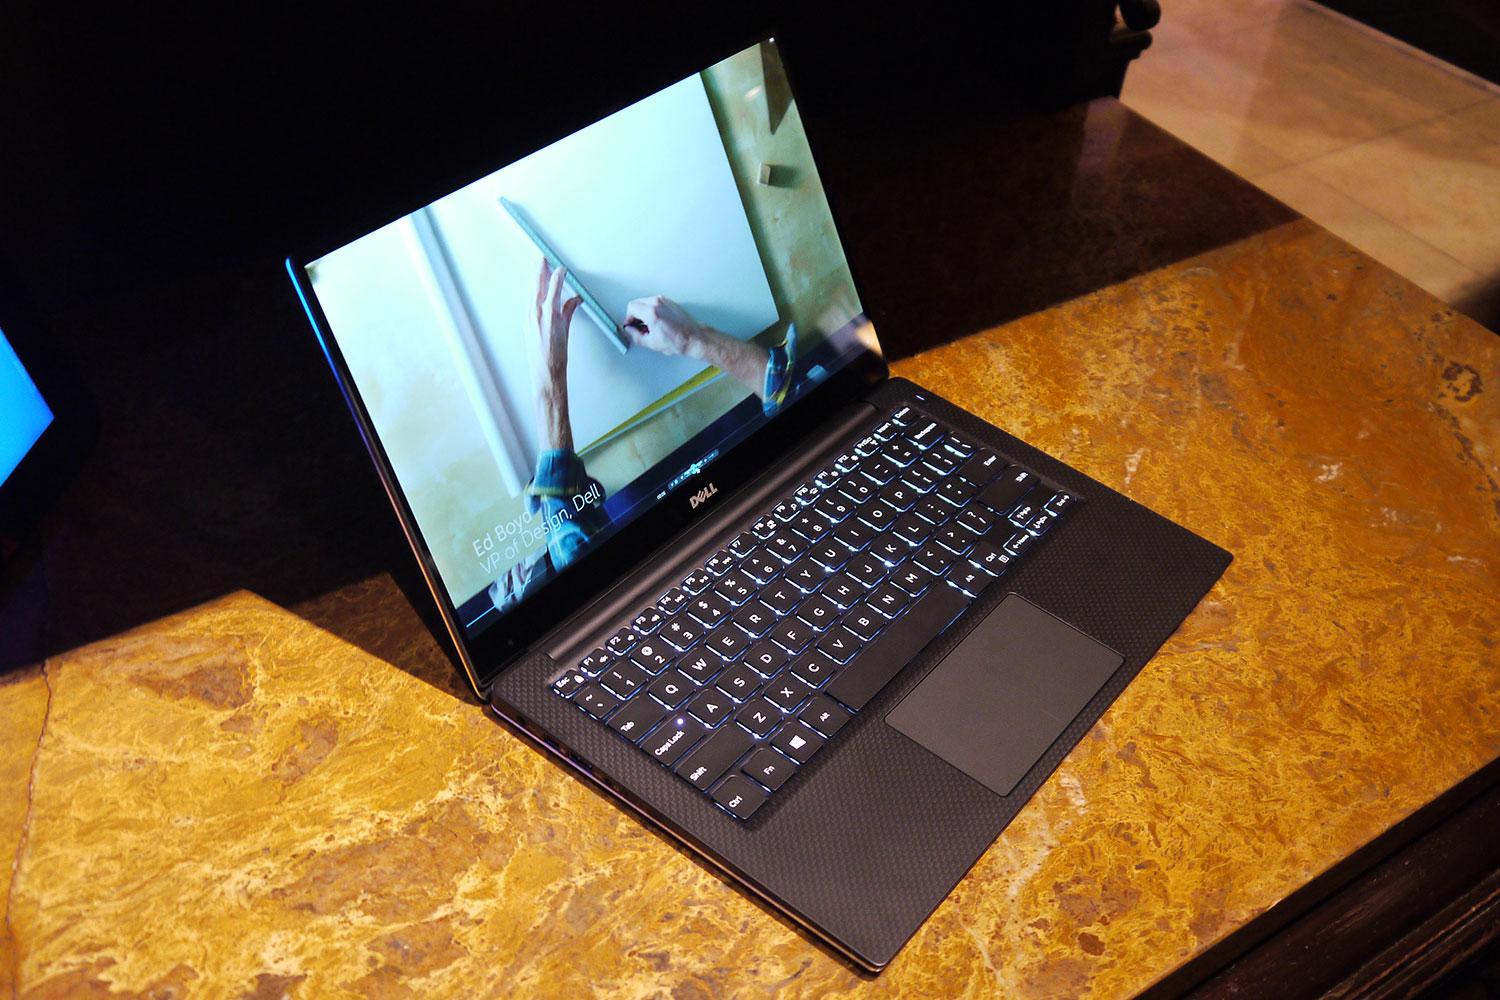 dell xps 13 laptop has a screen with virtually no bezel hands on p1100305